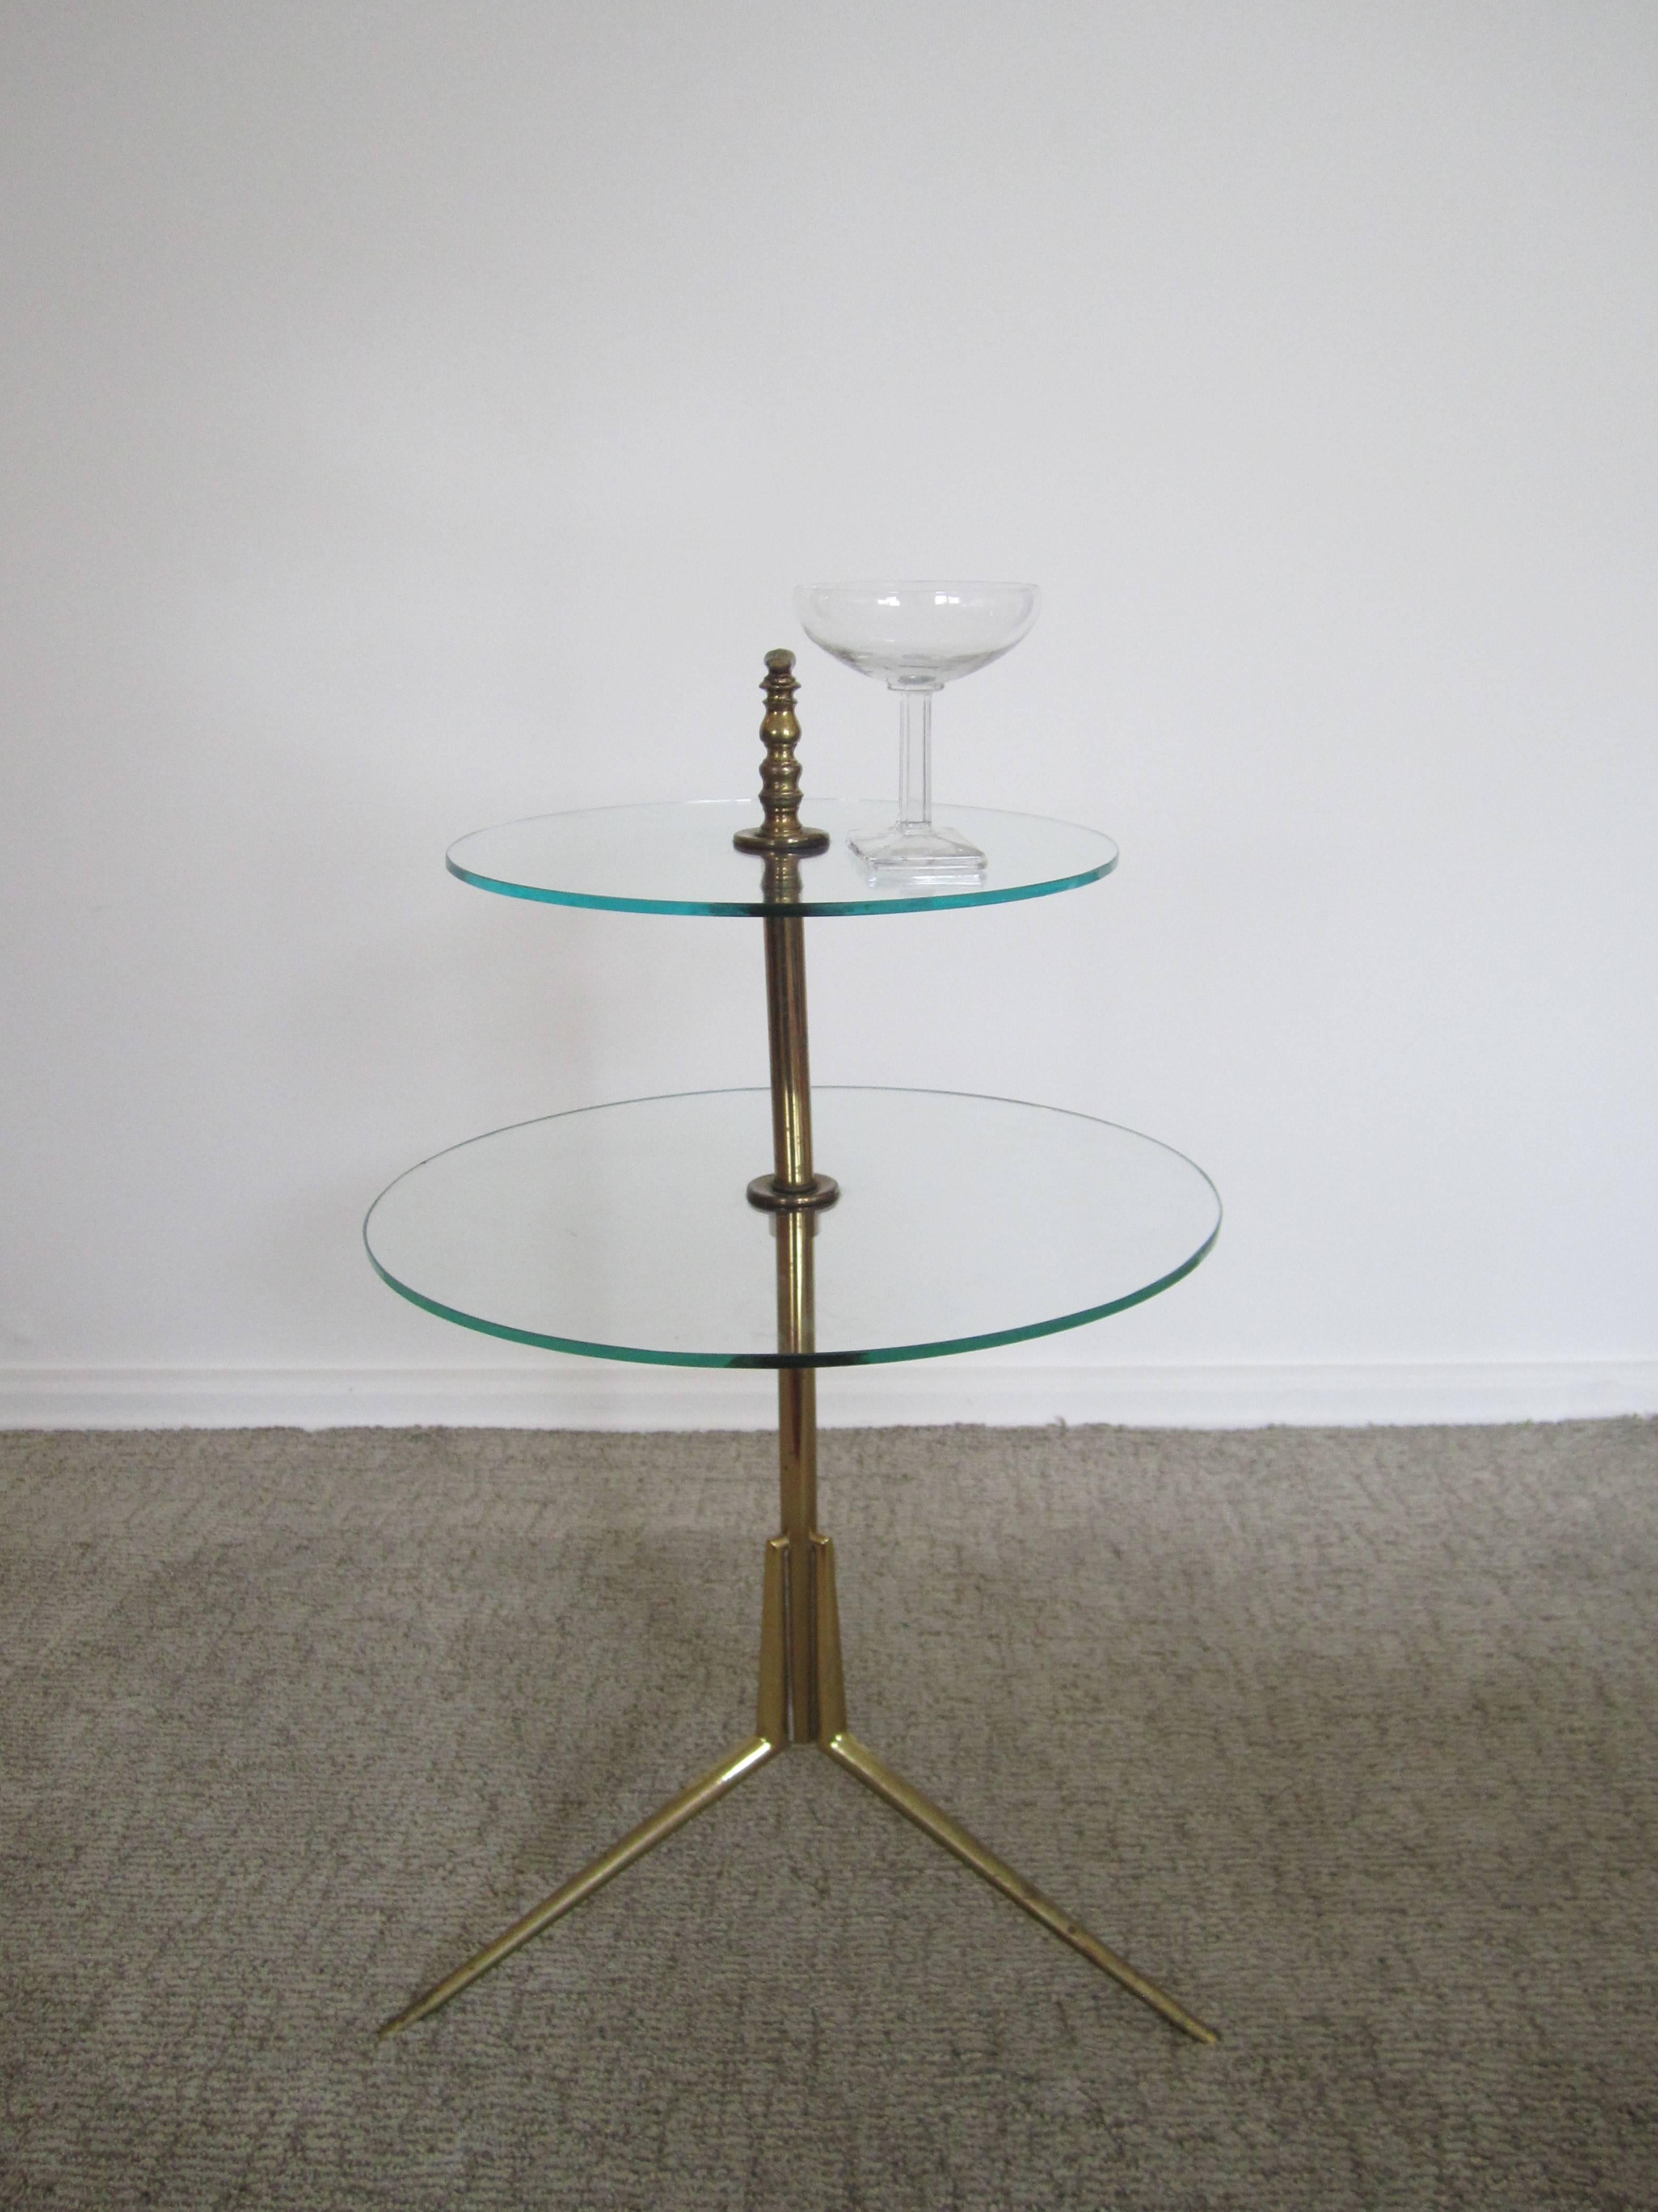 An Italian vintage Modern mid-century brass and glass two-tier side or drinks table with tripod base in the style of Italian designer Gio Ponti. Circa 1950s-1960s. Item available here online. By request, item can be made available by appointment to